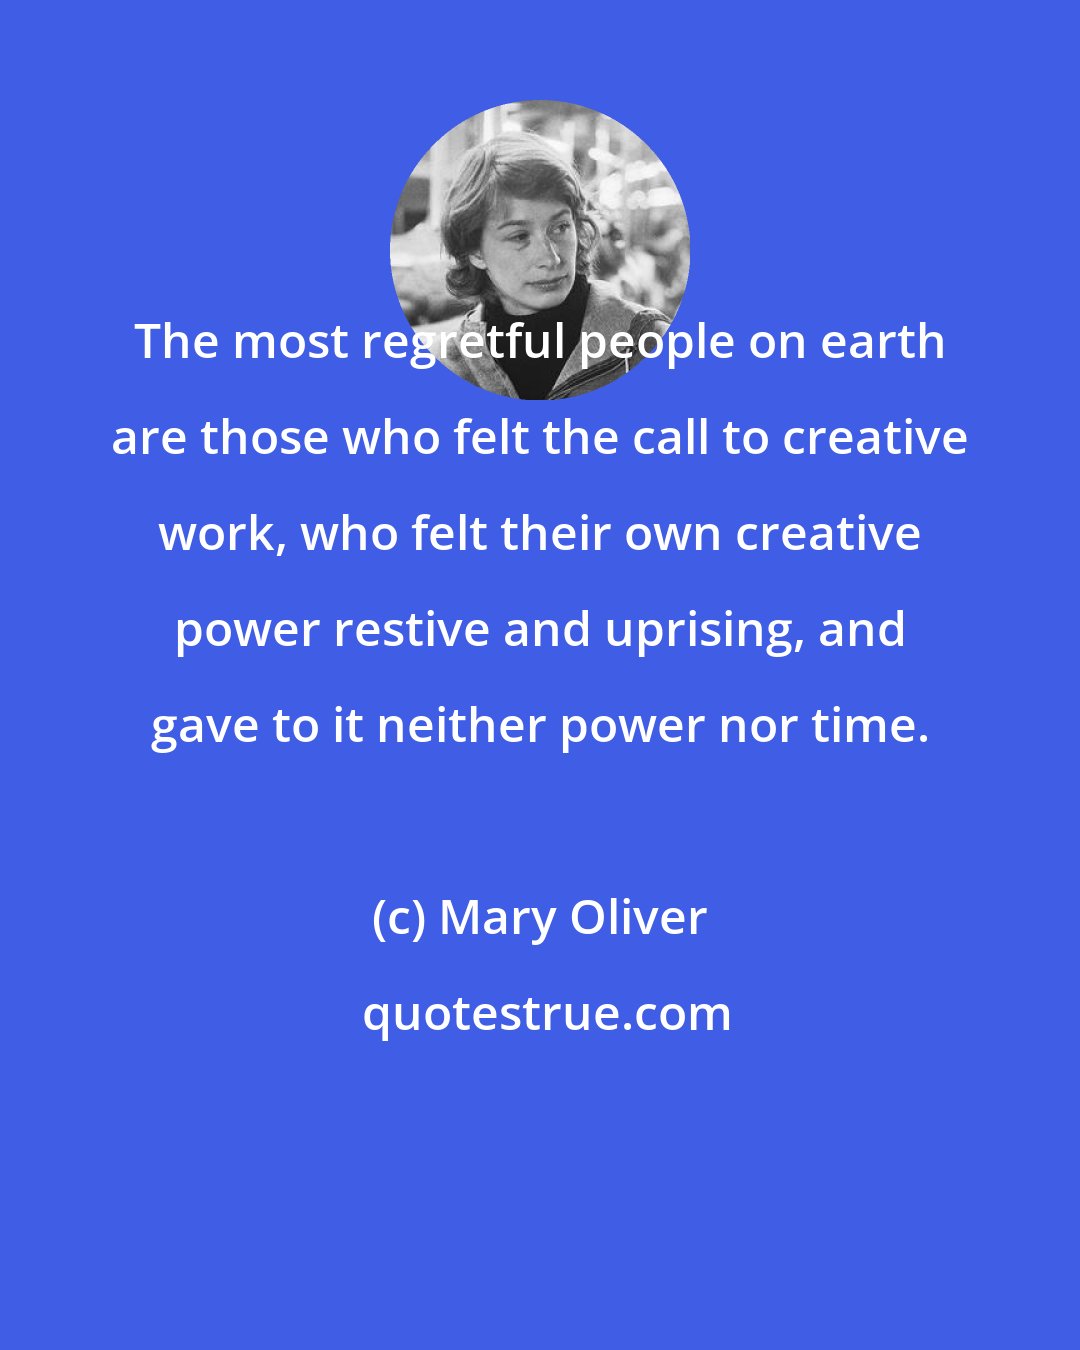 Mary Oliver: The most regretful people on earth are those who felt the call to creative work, who felt their own creative power restive and uprising, and gave to it neither power nor time.